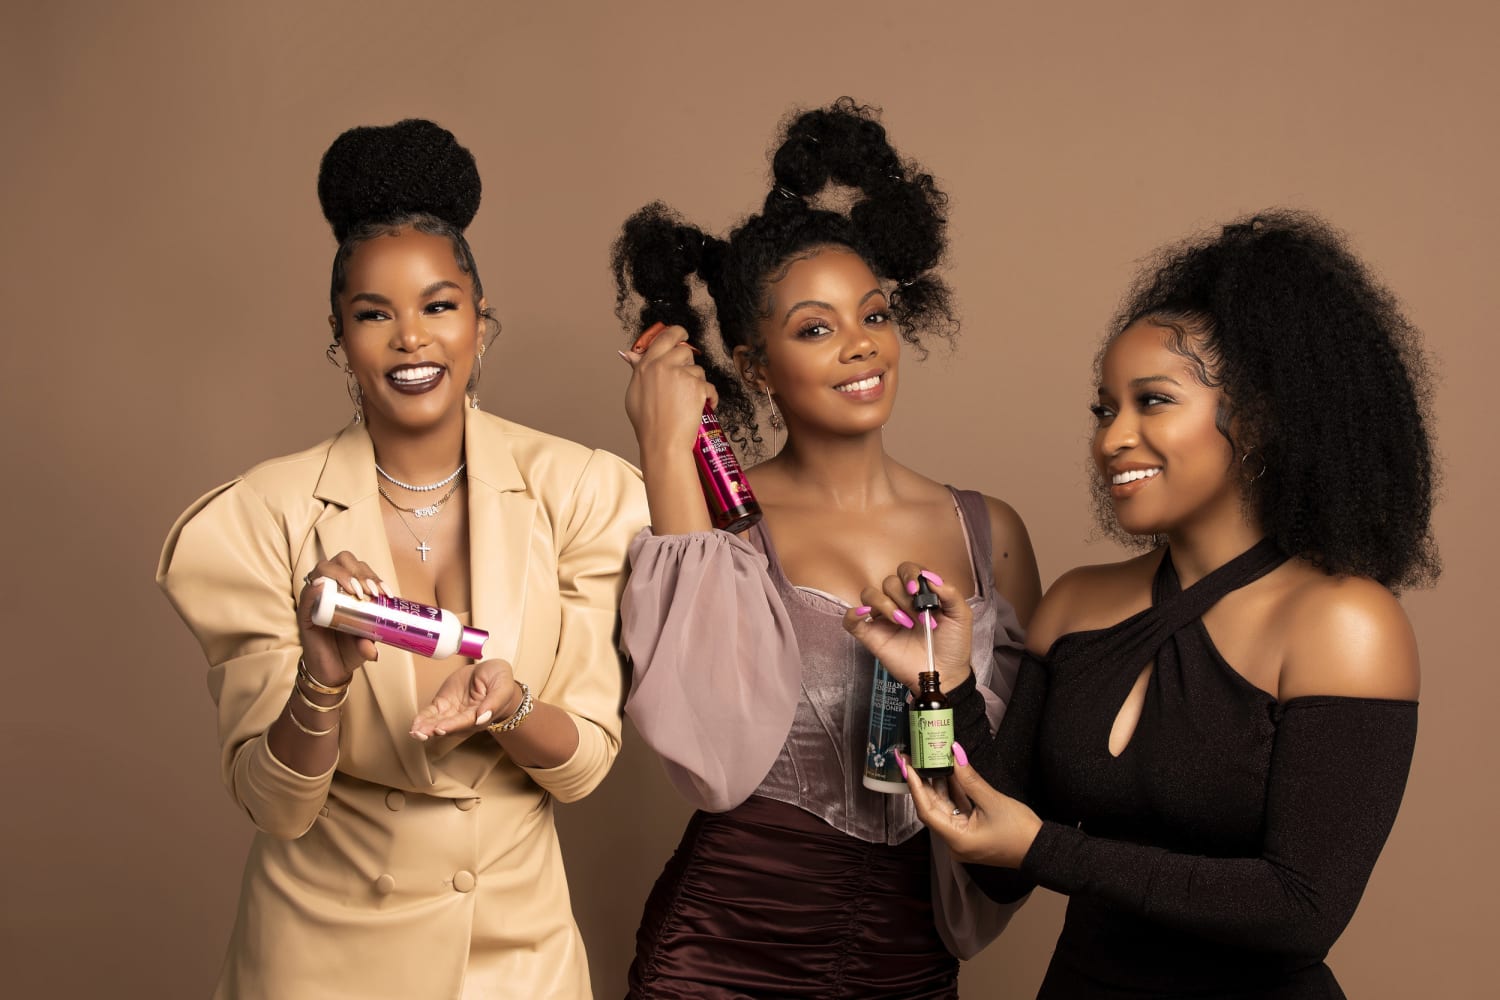 Why Is Black Hair Care Brand Mielle At The Center of TikTok Drama? -  Okayplayer